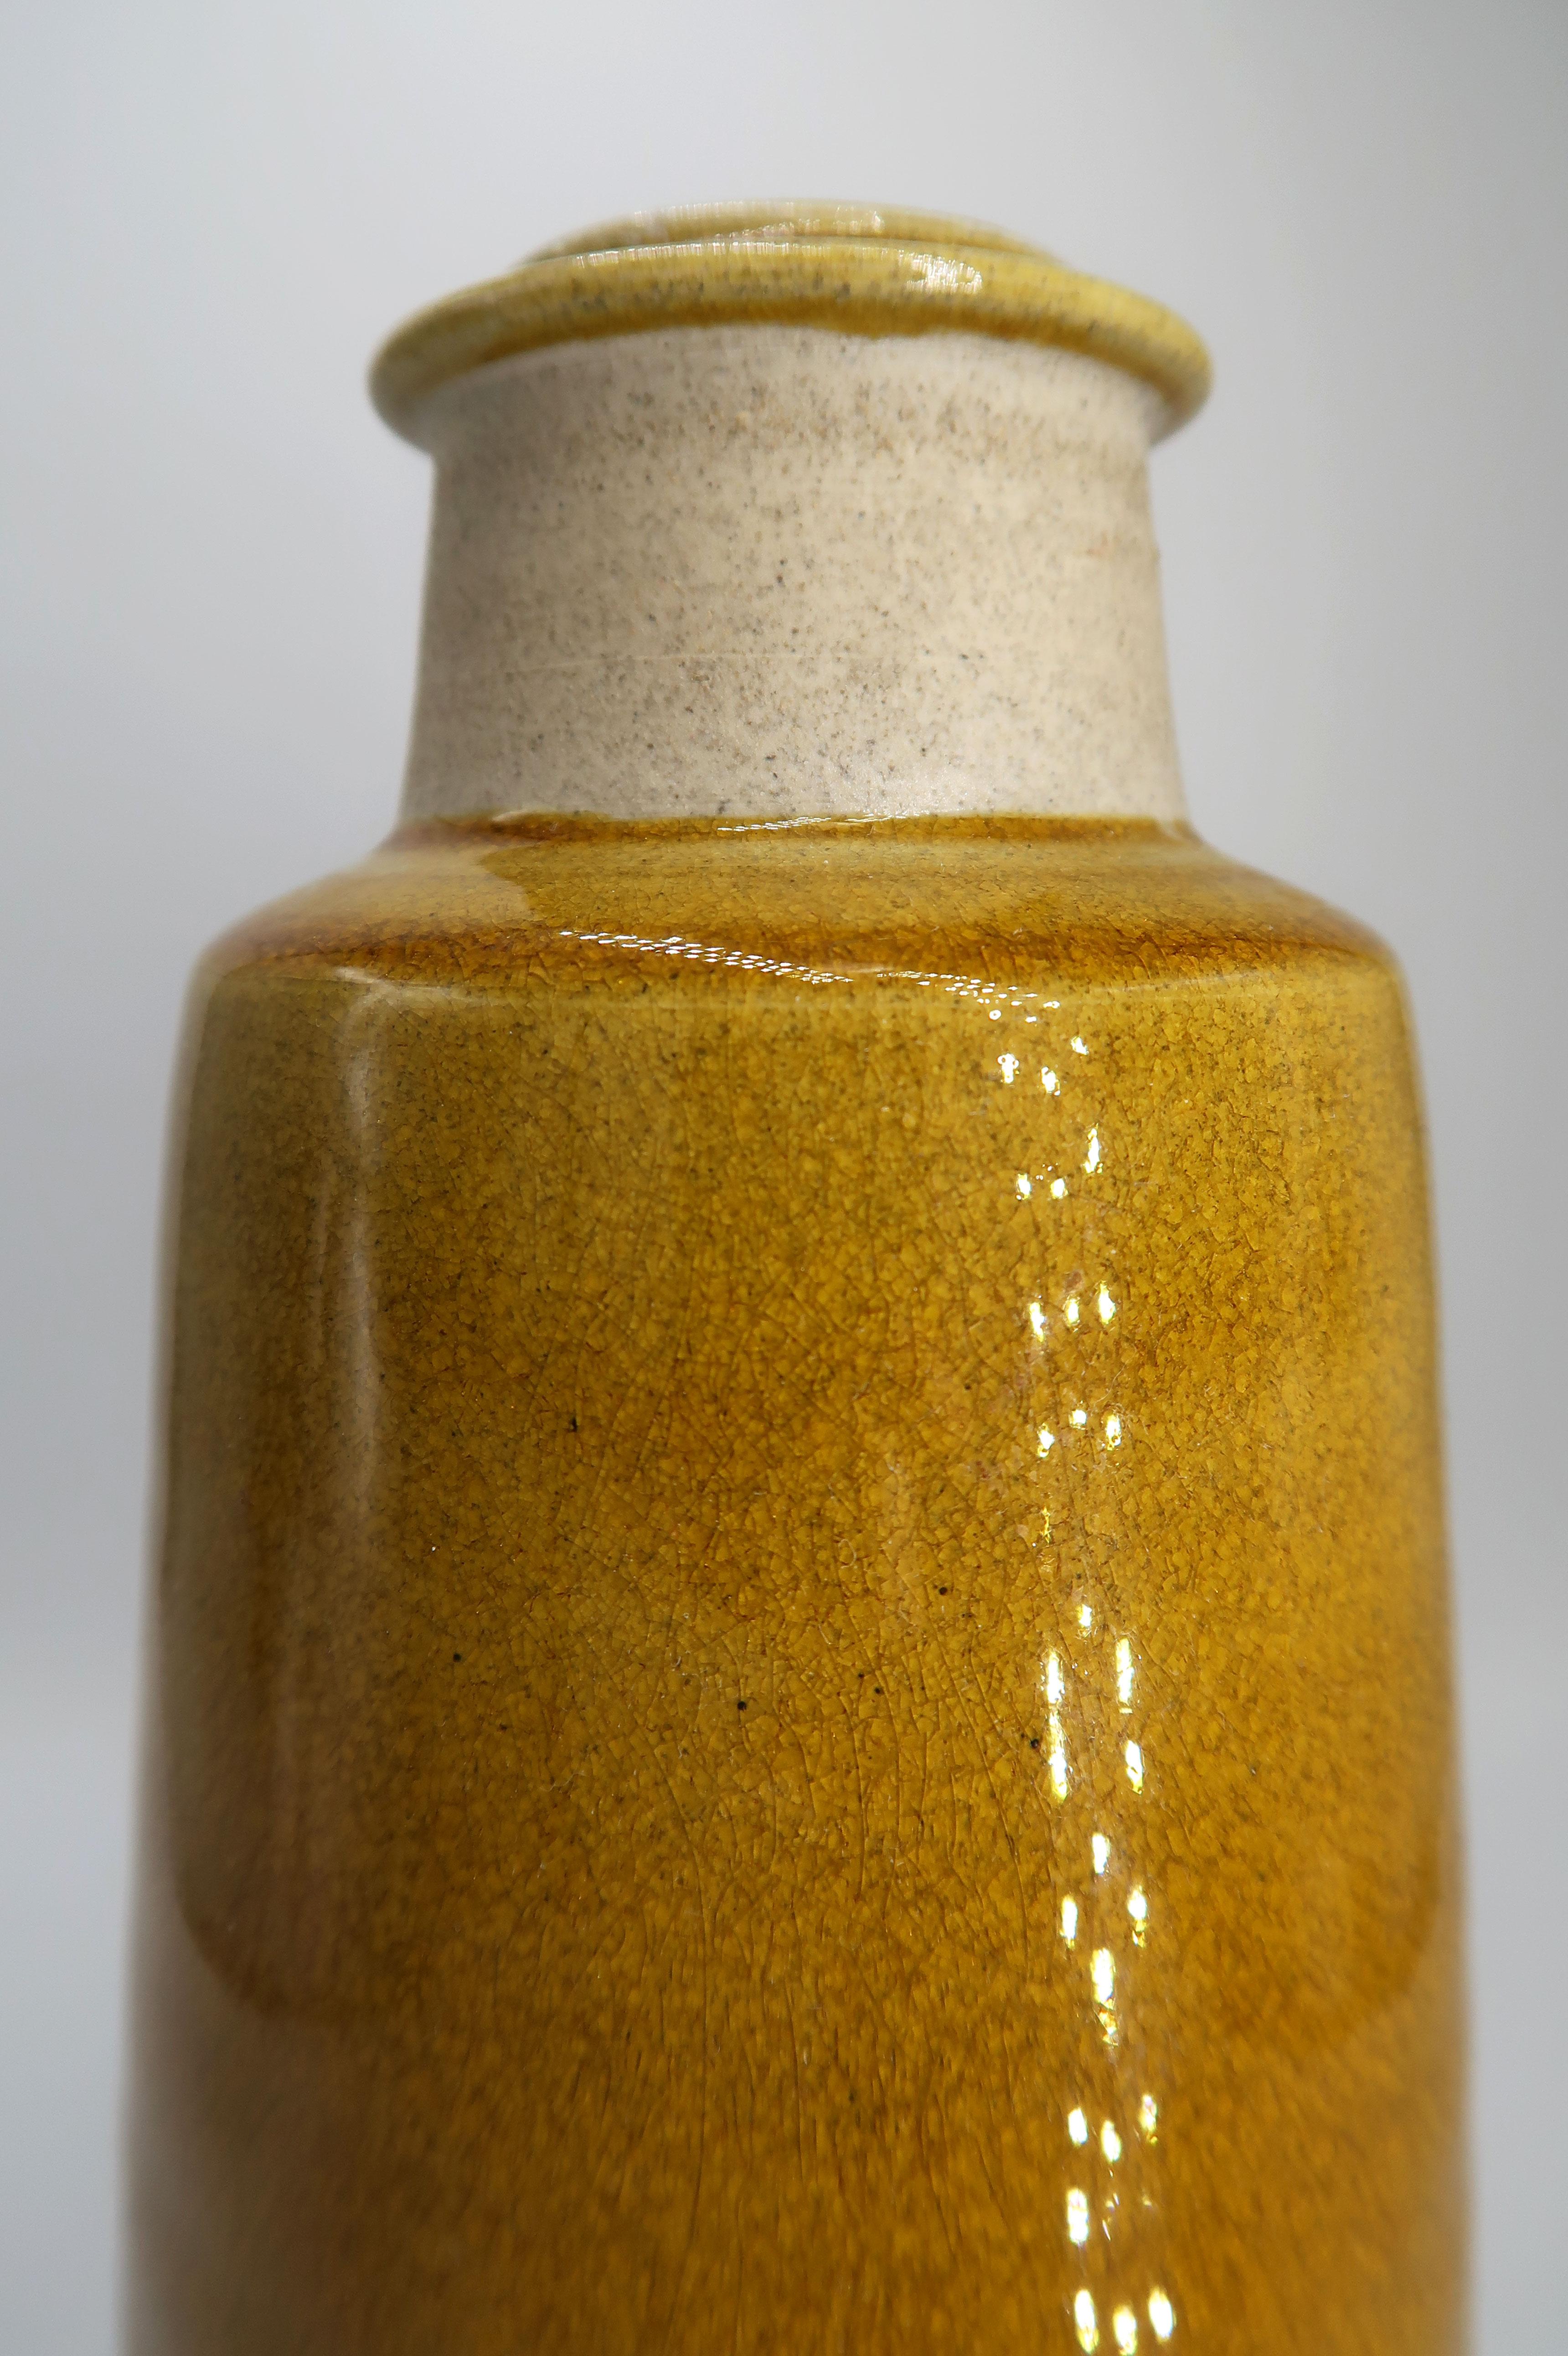 Stunning handmade Danish mid-century modern stoneware vase by Kähler. Raw neck with warm ochre shiny crackle glaze on the top and belly. Manufactured in the small Danish town of Naestved in the 1950s. Signed and stamped under base. A beautiful